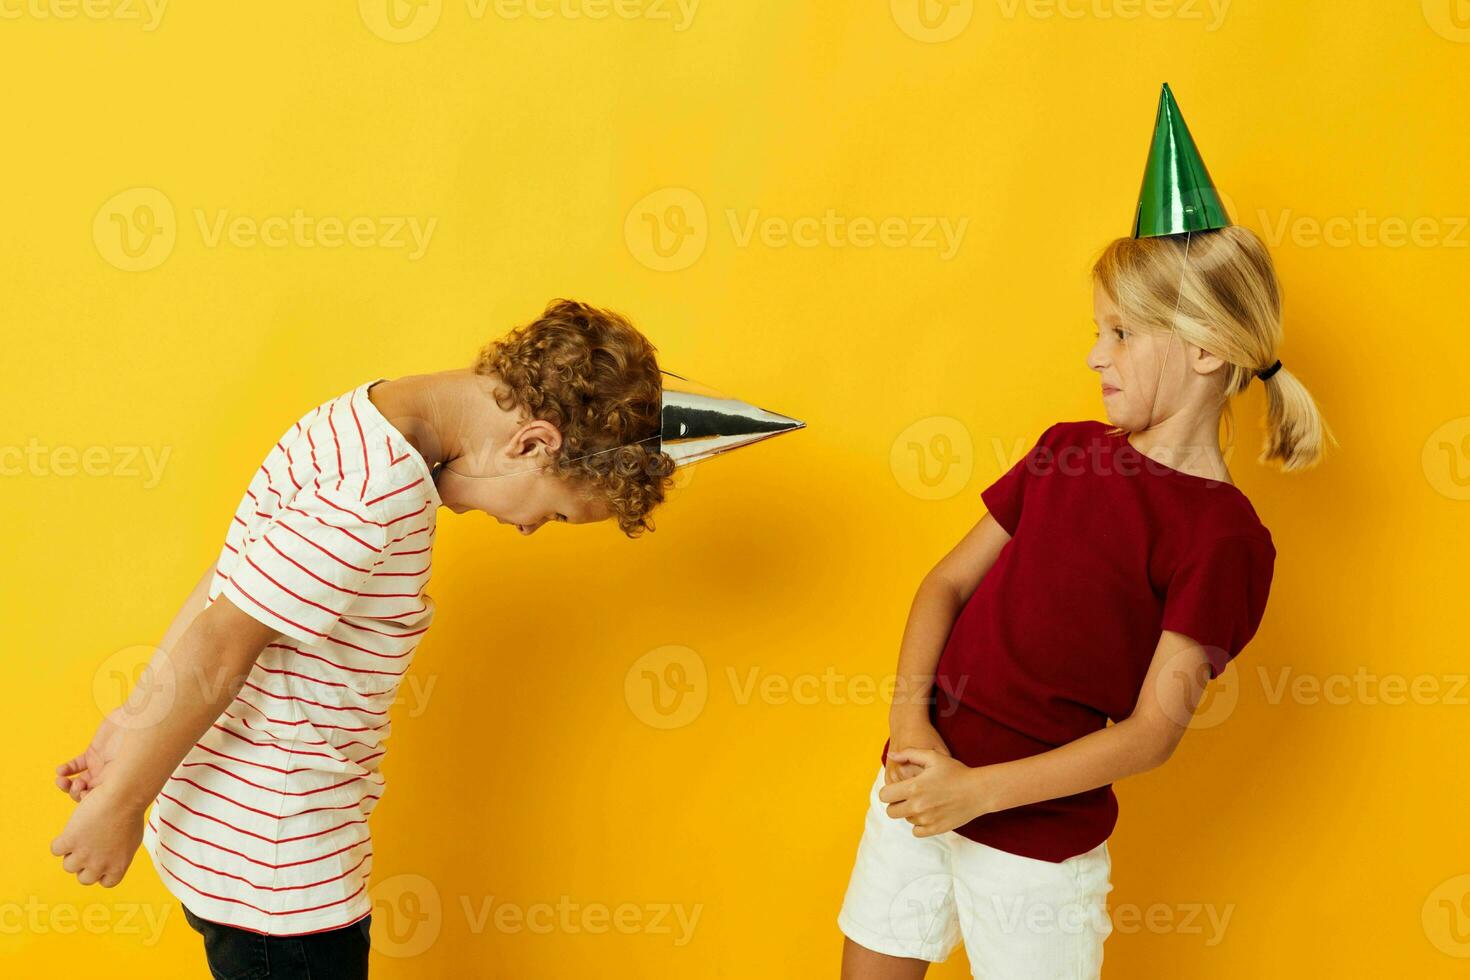 Cute preschool kids holiday fun with caps on your head yellow background photo